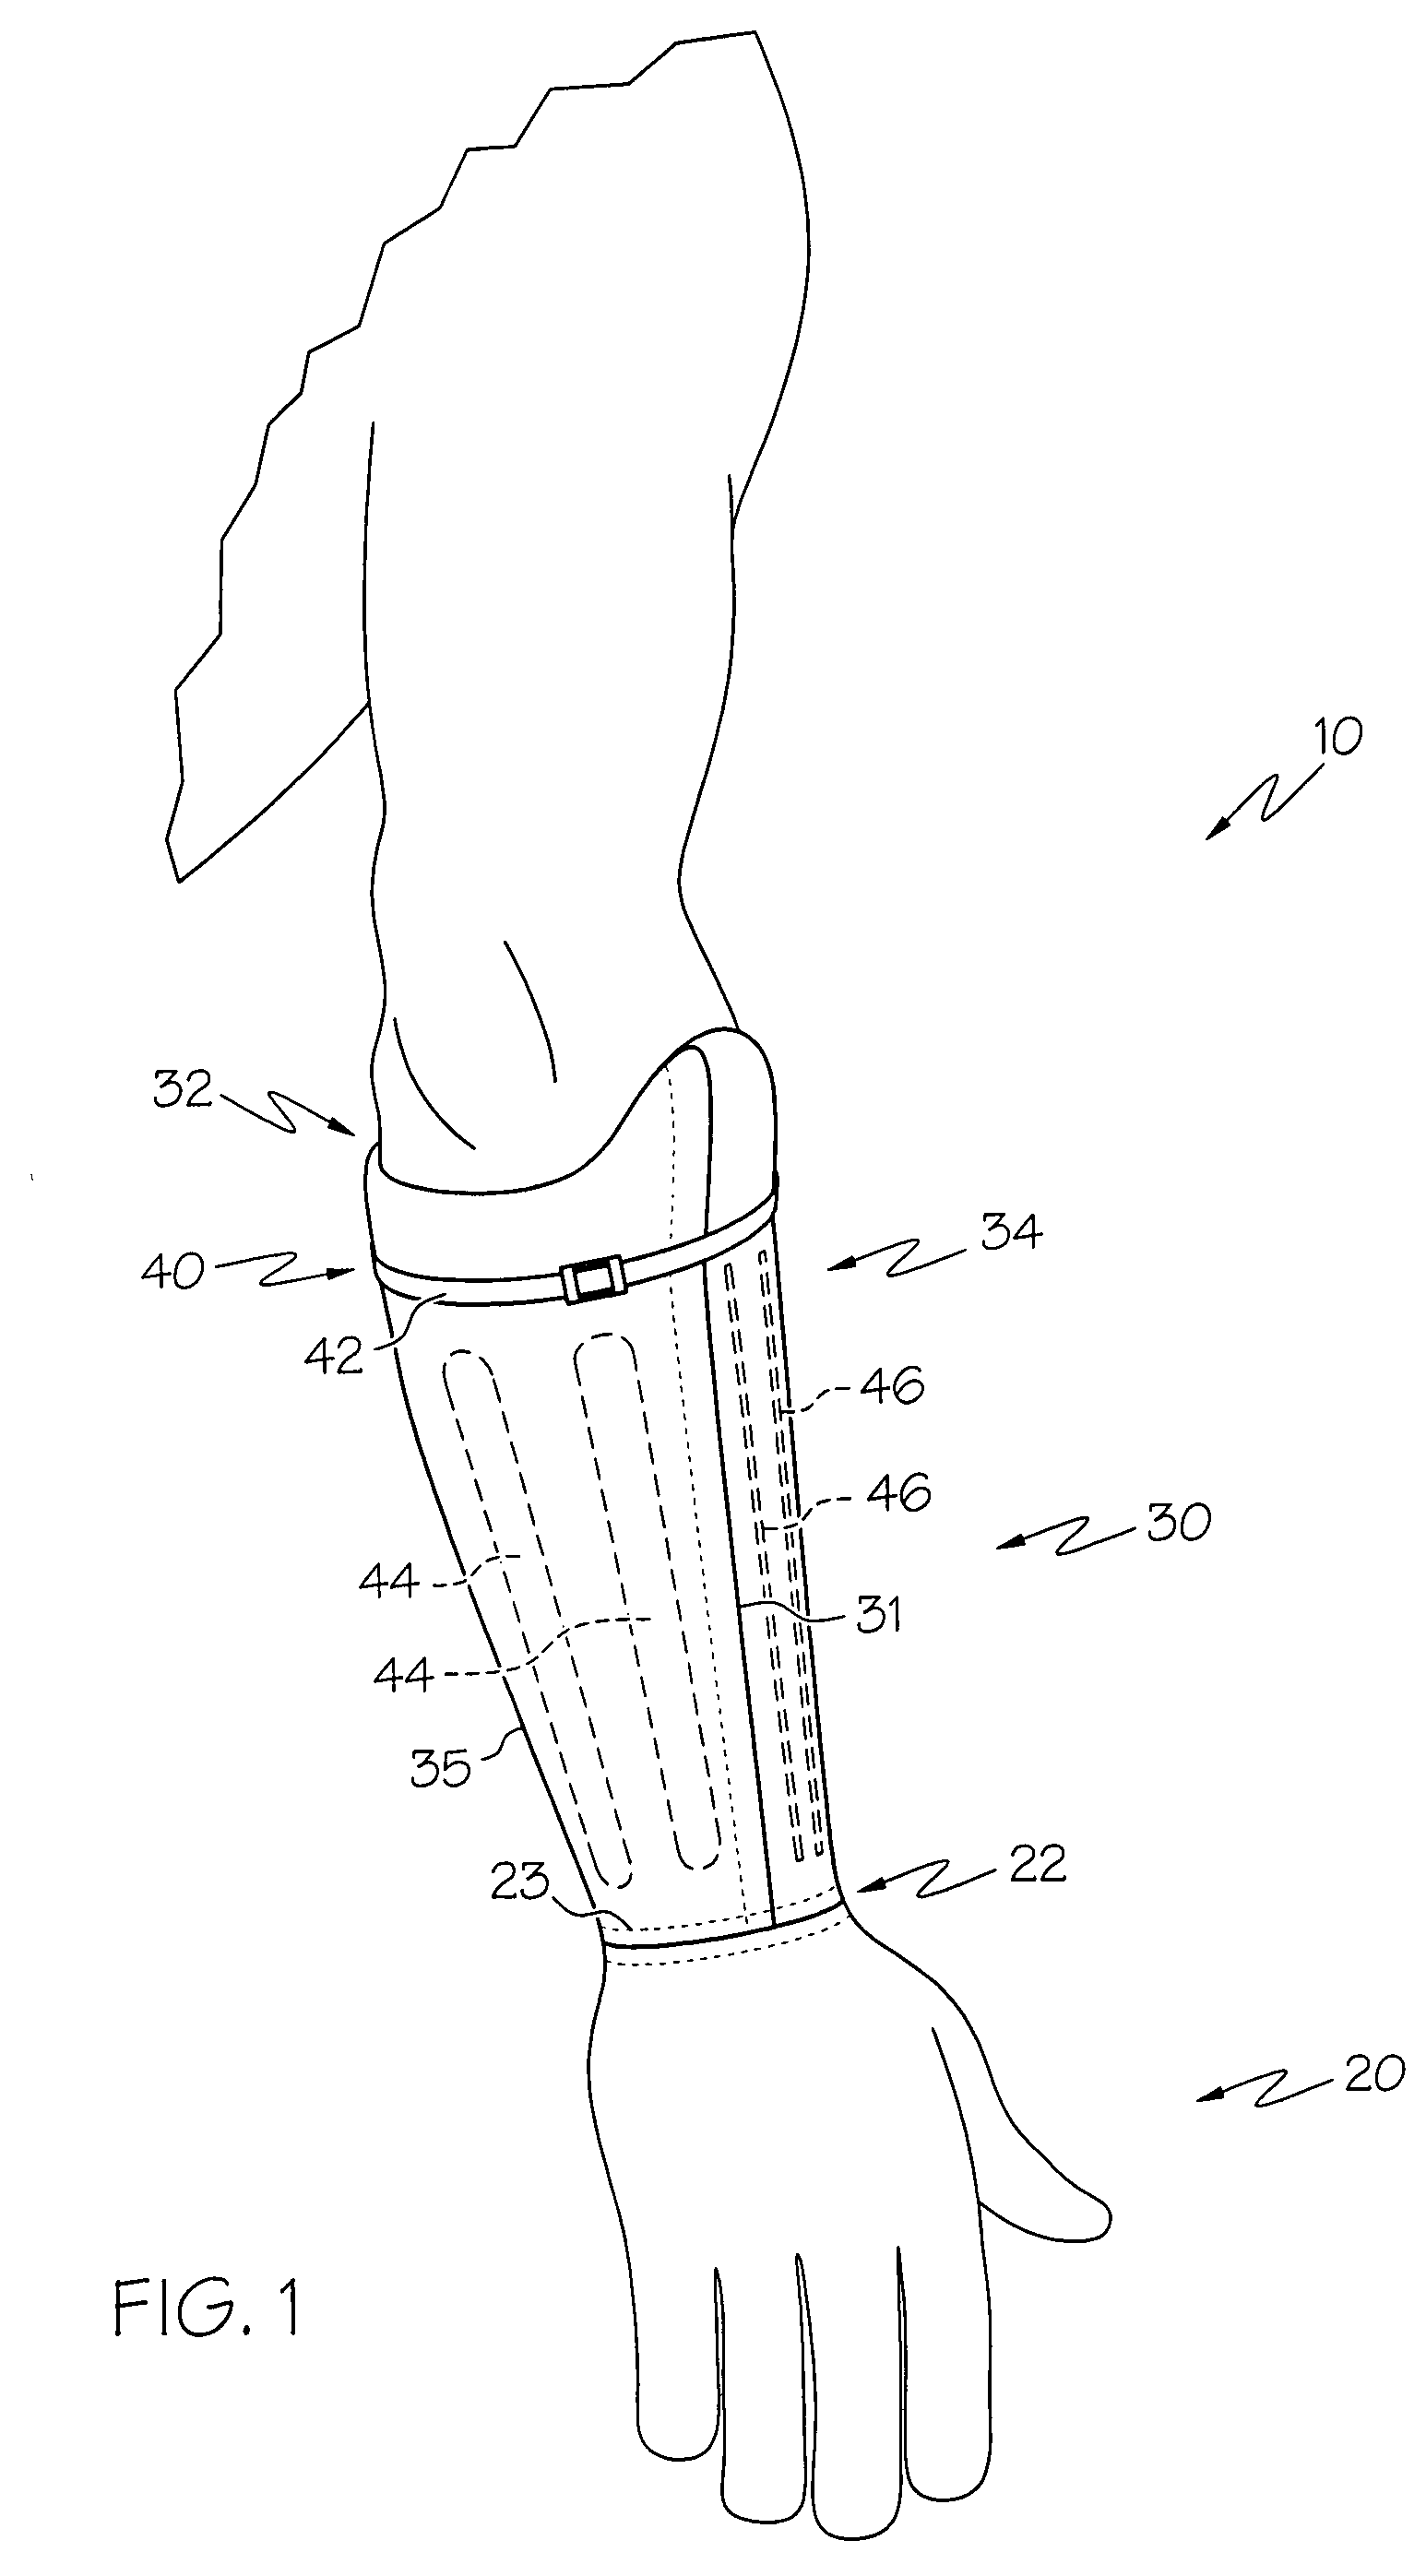 Device for the hand and forearm of the user